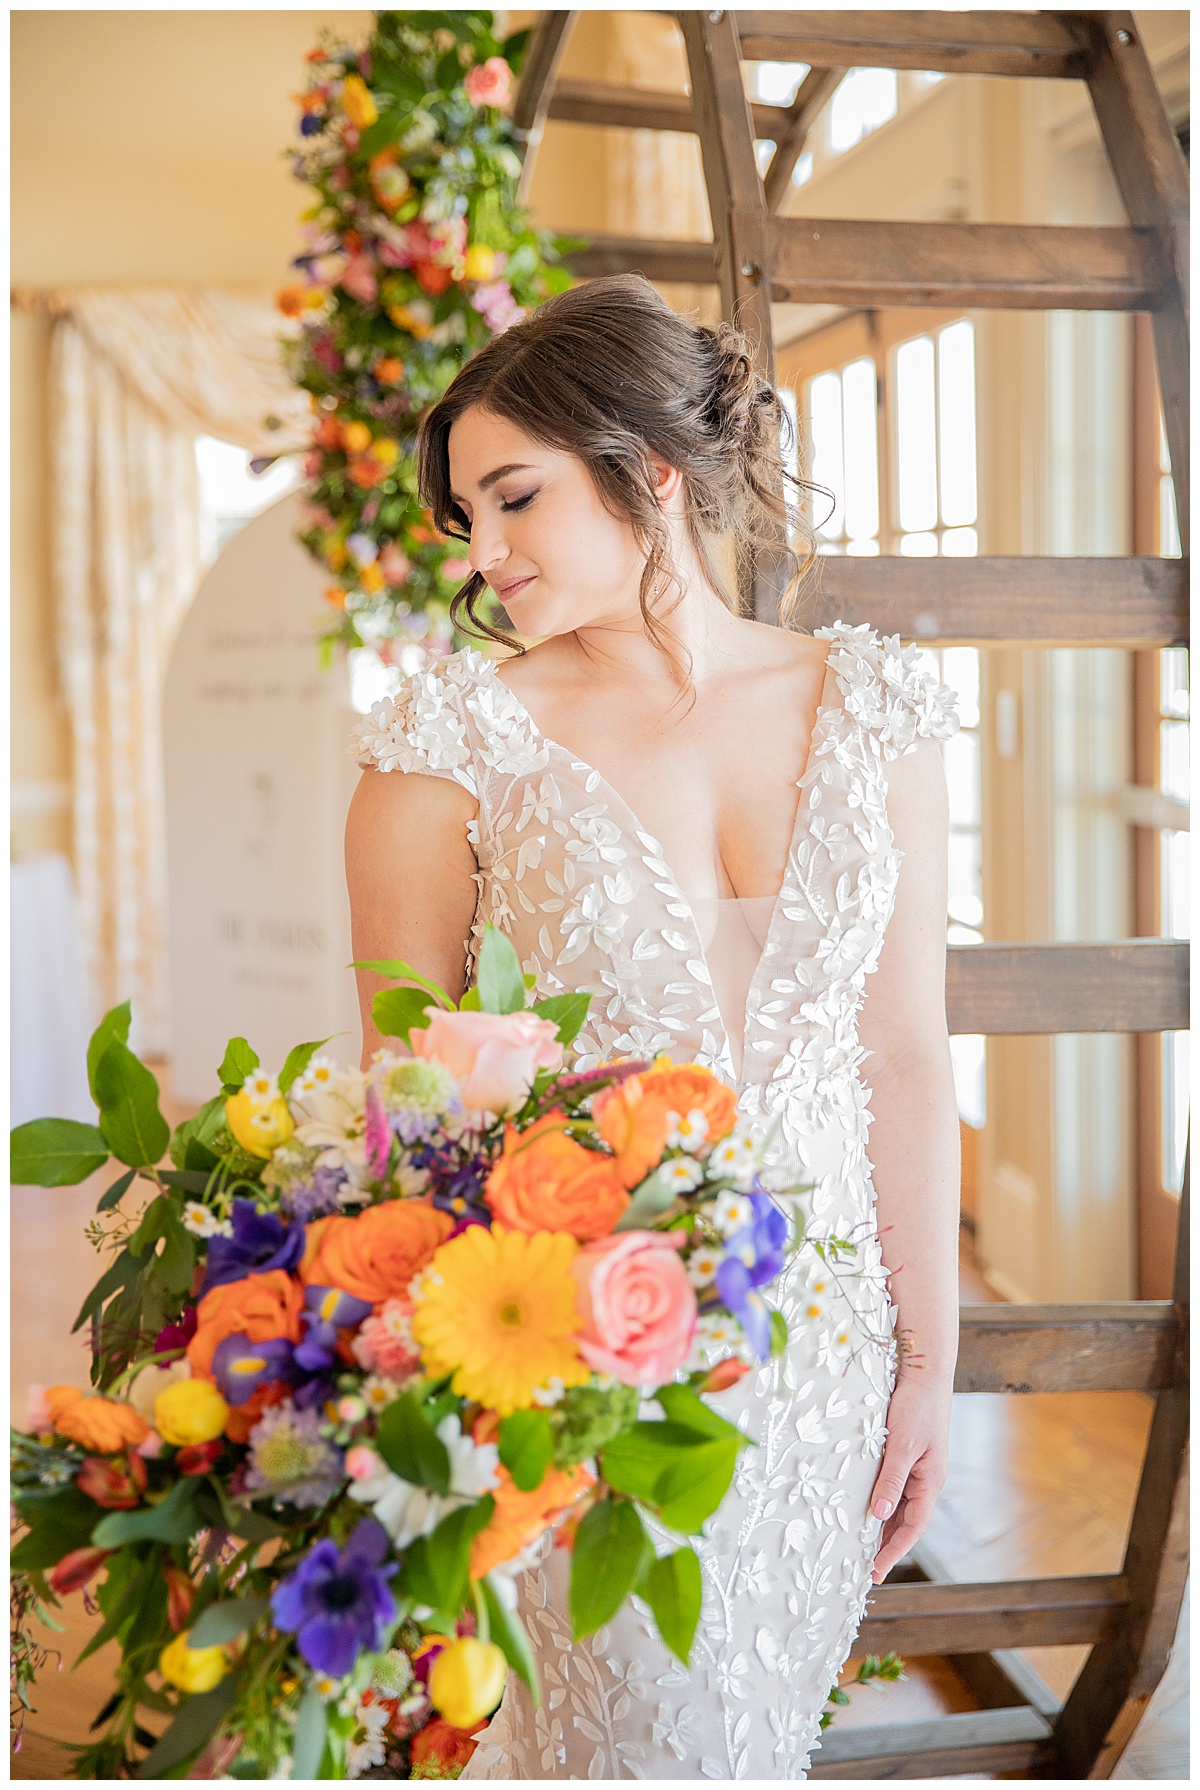 A bride poses in front of a circular wedding arch covered in colorful wildflowers in this spring wedding inspiration shoot.